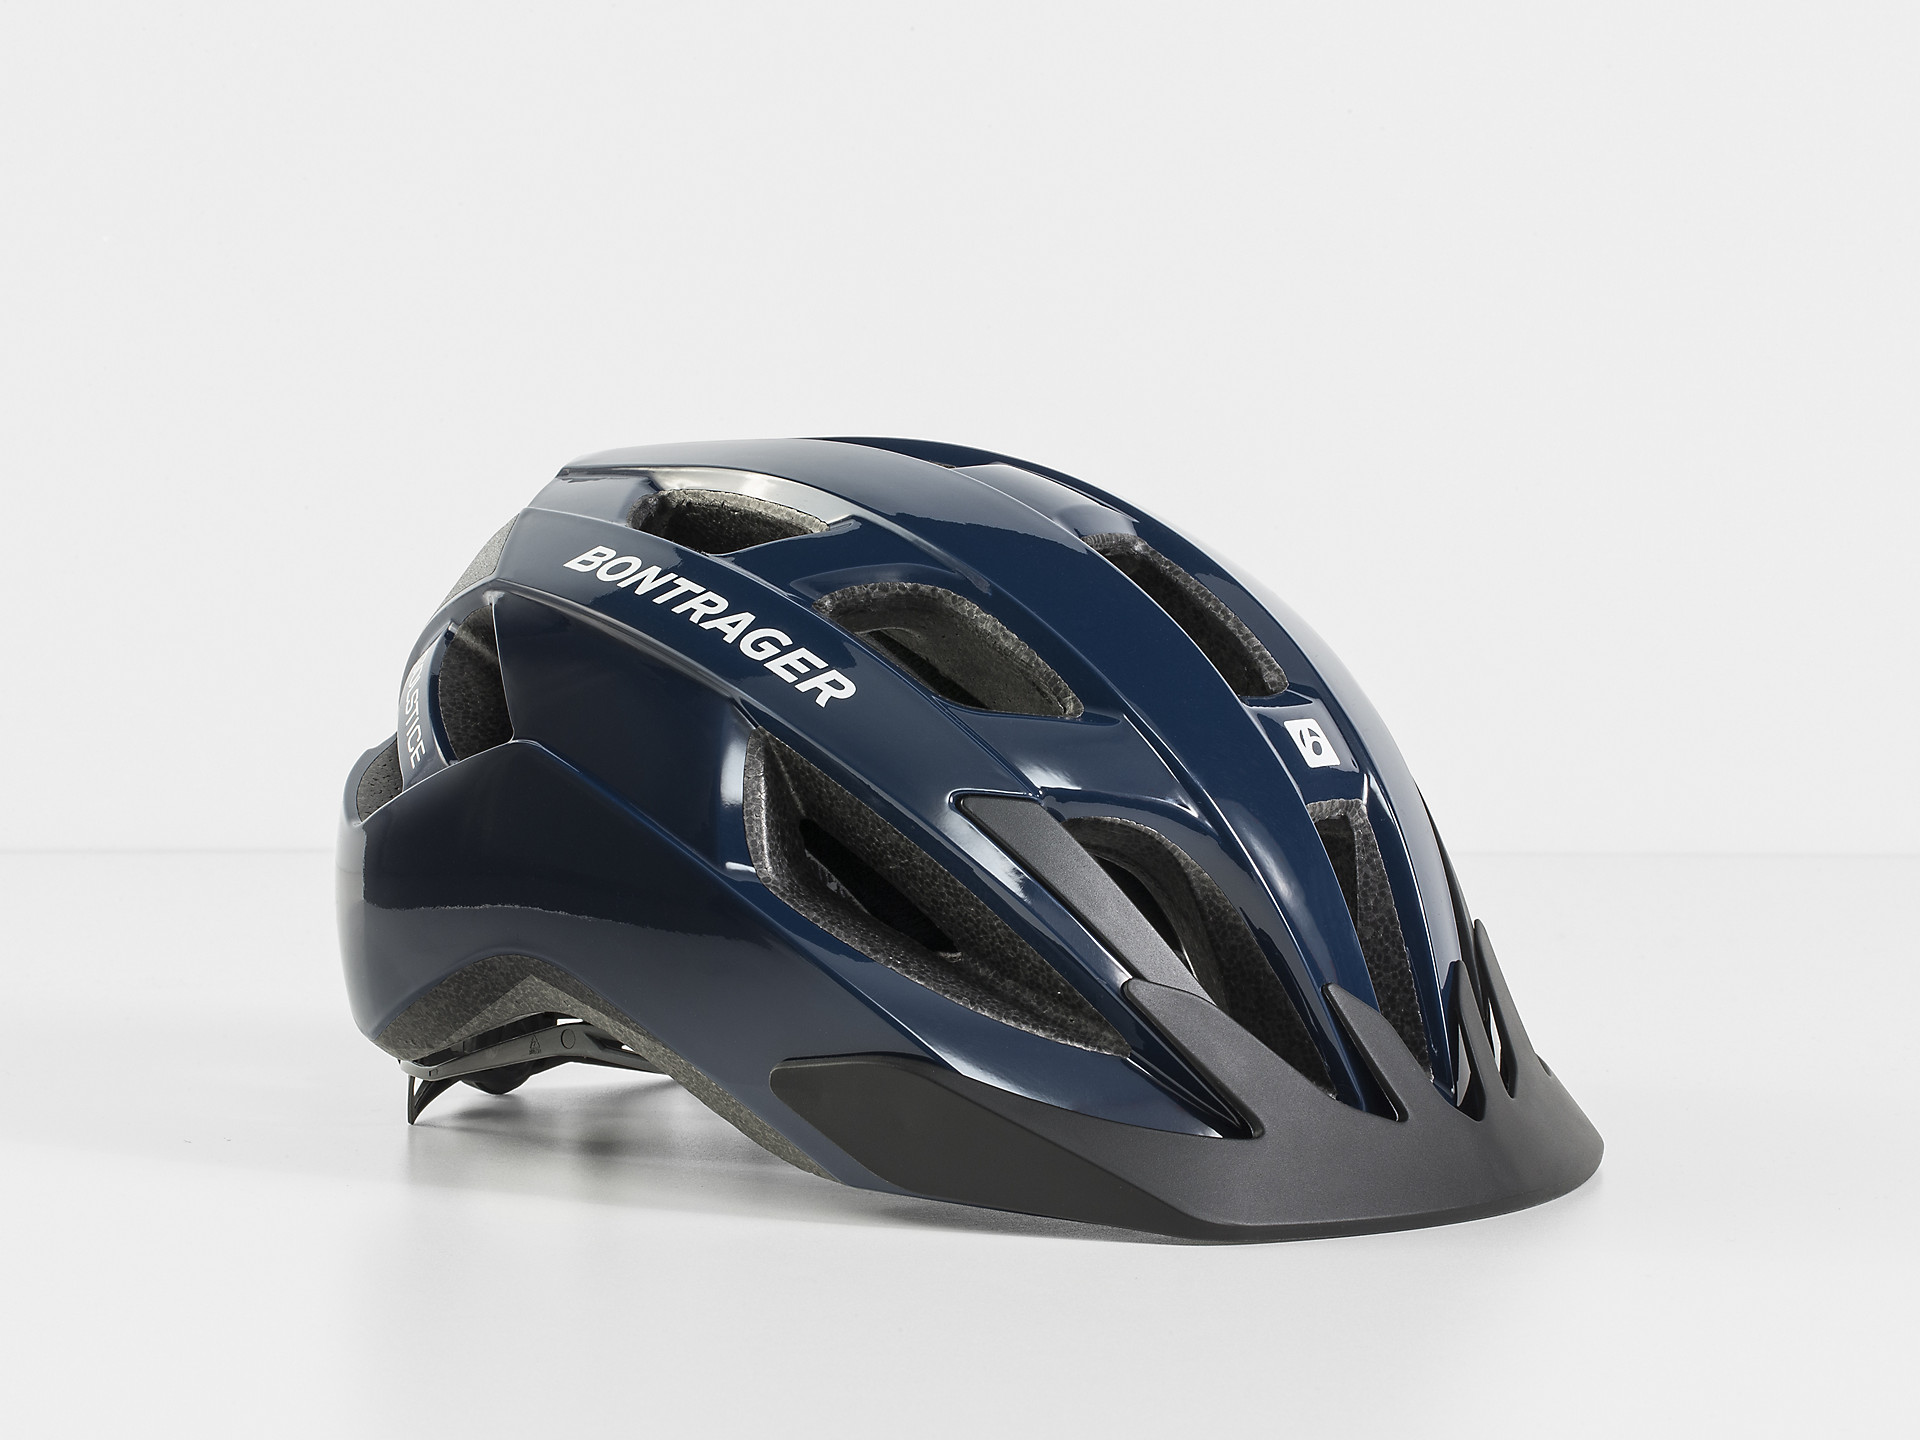 <a href="https://cycles-clement.be/product/casque-bont-solstice-s-m-navy-ce/">CASQUE BONT SOLSTICE  S/M NAVY CE</a>